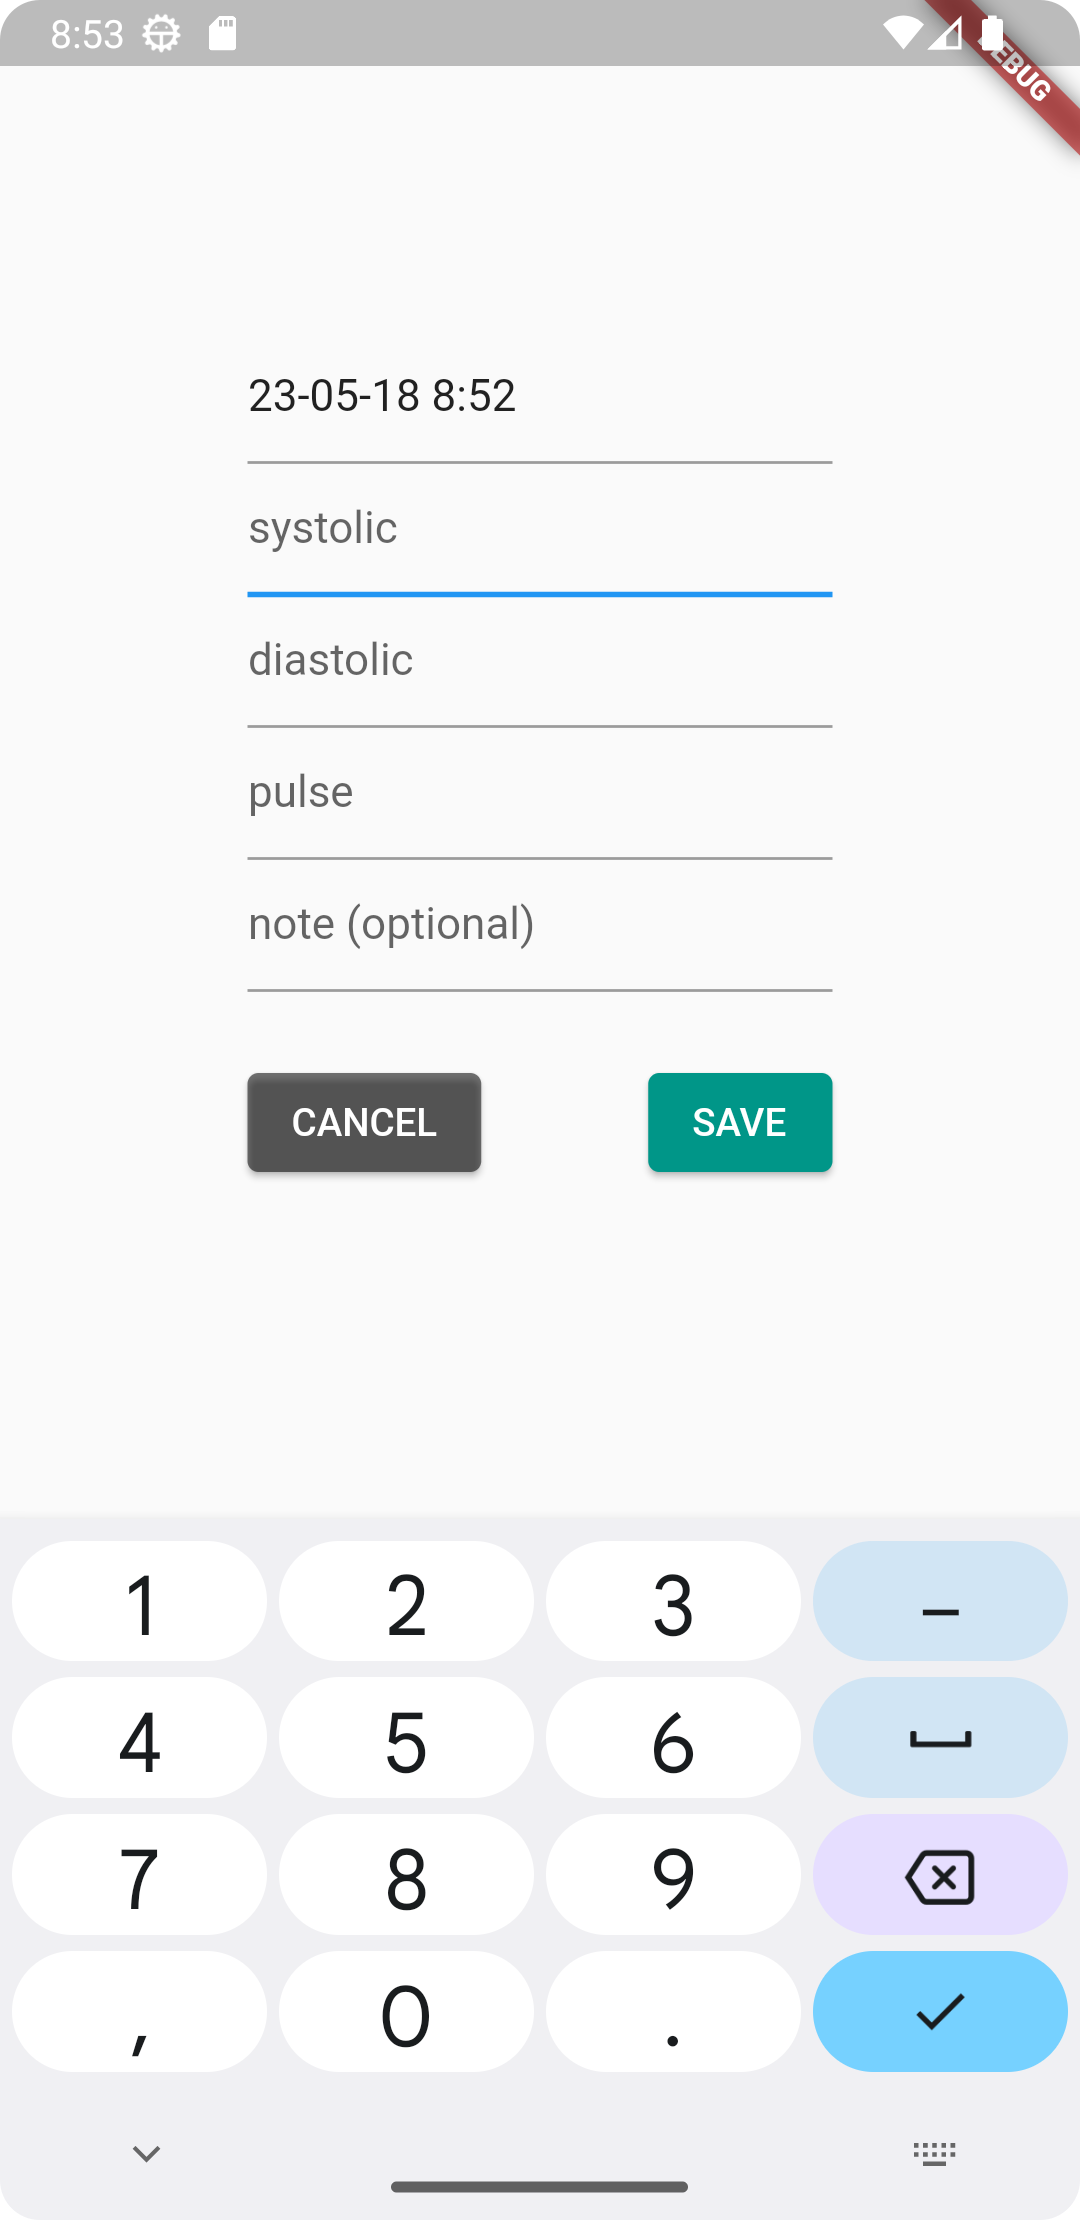 A cross platform app to save blood pressure values with export function